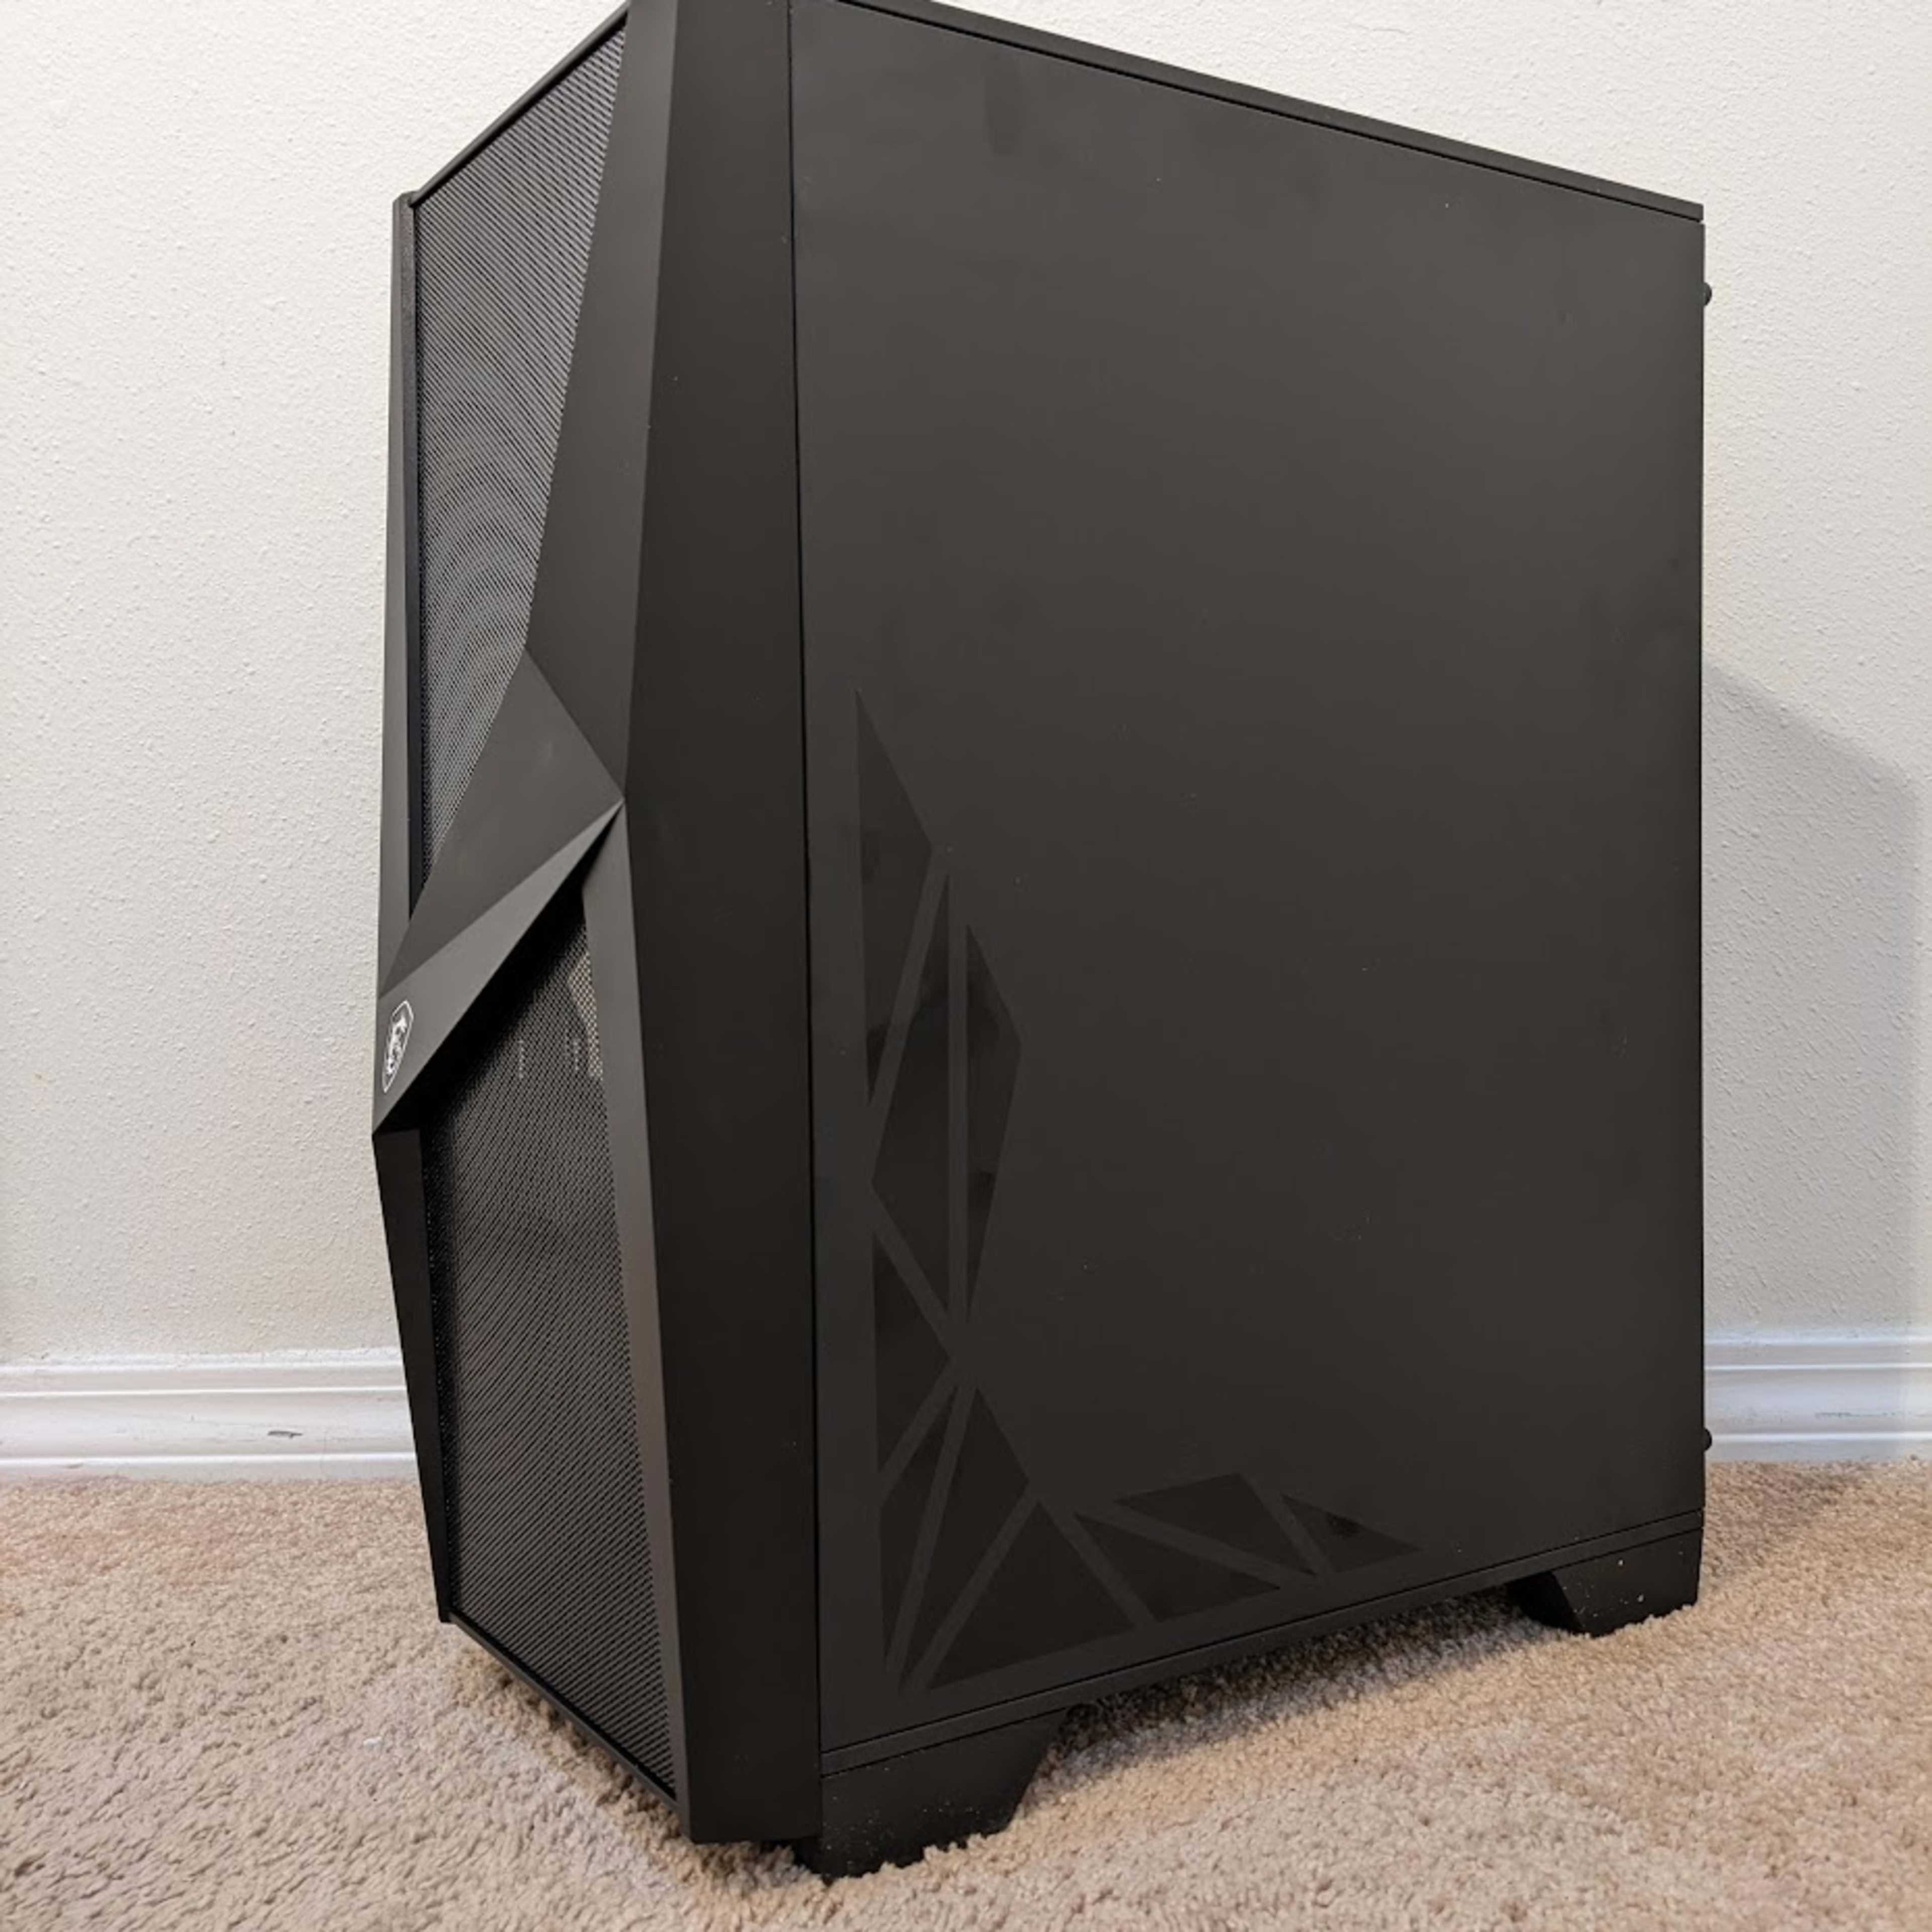 MSI ATX MAG Forge 100R Tempered Glass ATX Mid-Tower Case - MAG FORGE 100R